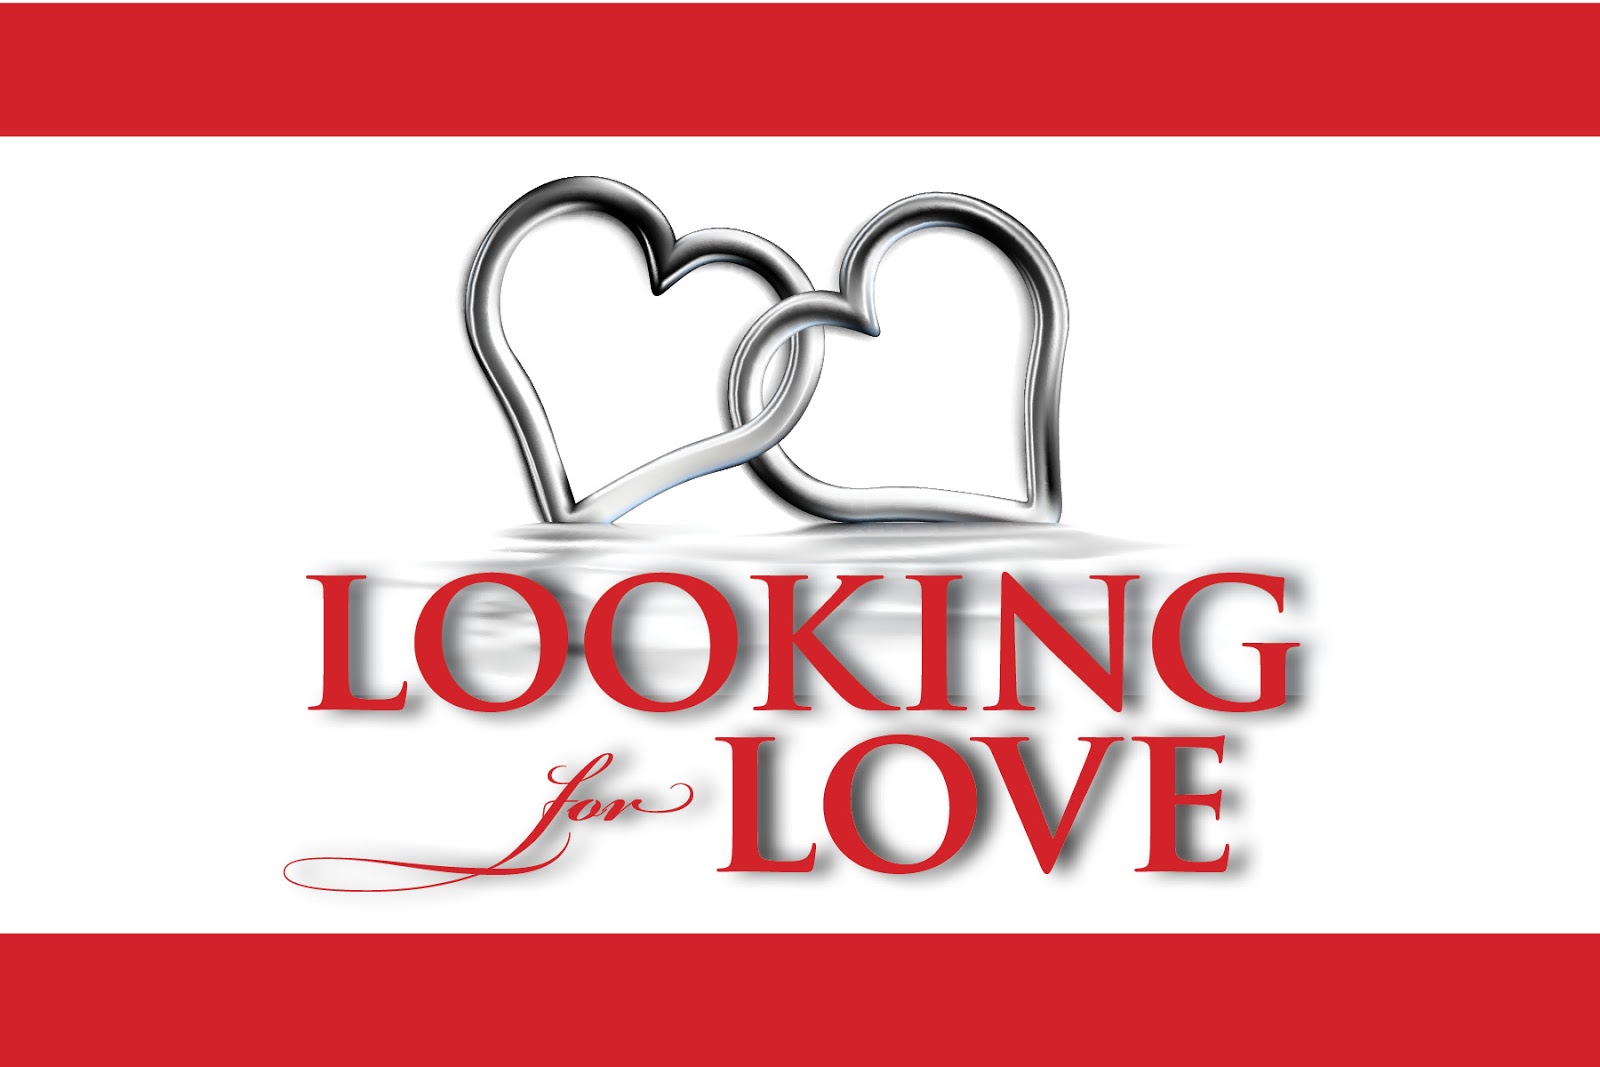 Found true love. Looking for Love. For Love. Looking for your Love. Your_loving_look.